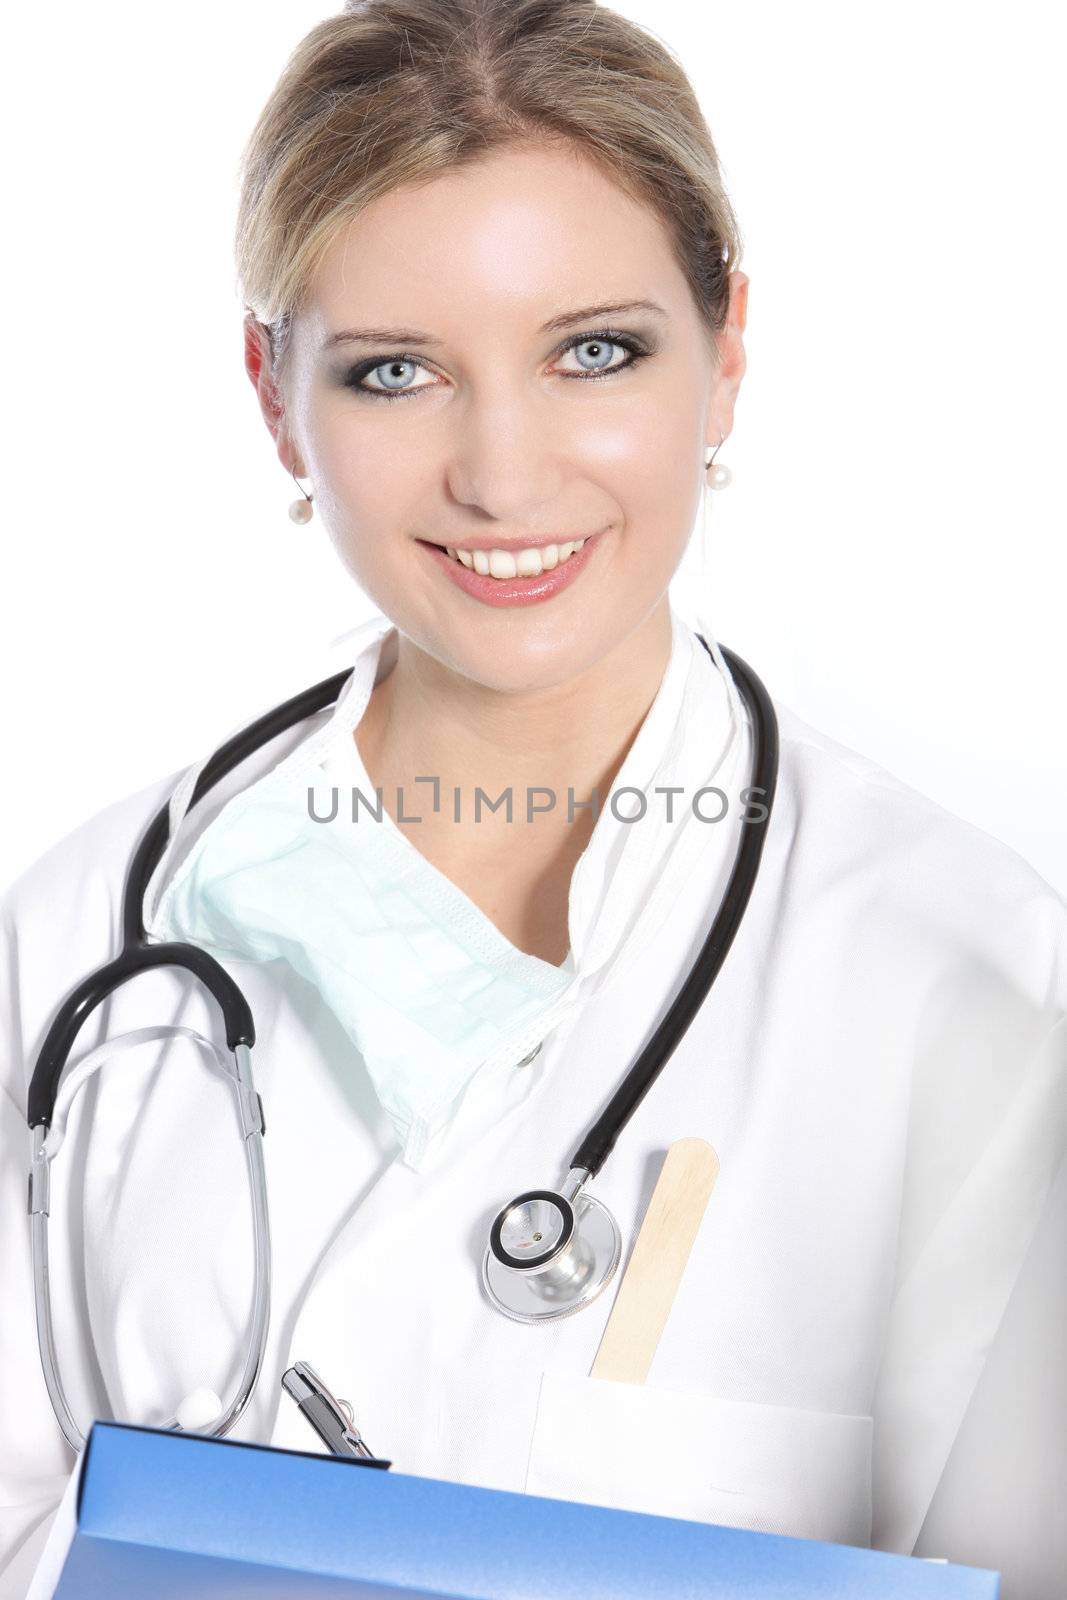 Smiling attractive young female nurse or doctor with a stethoscope around her neck carrying a file, head and shoulders studio portrait on white